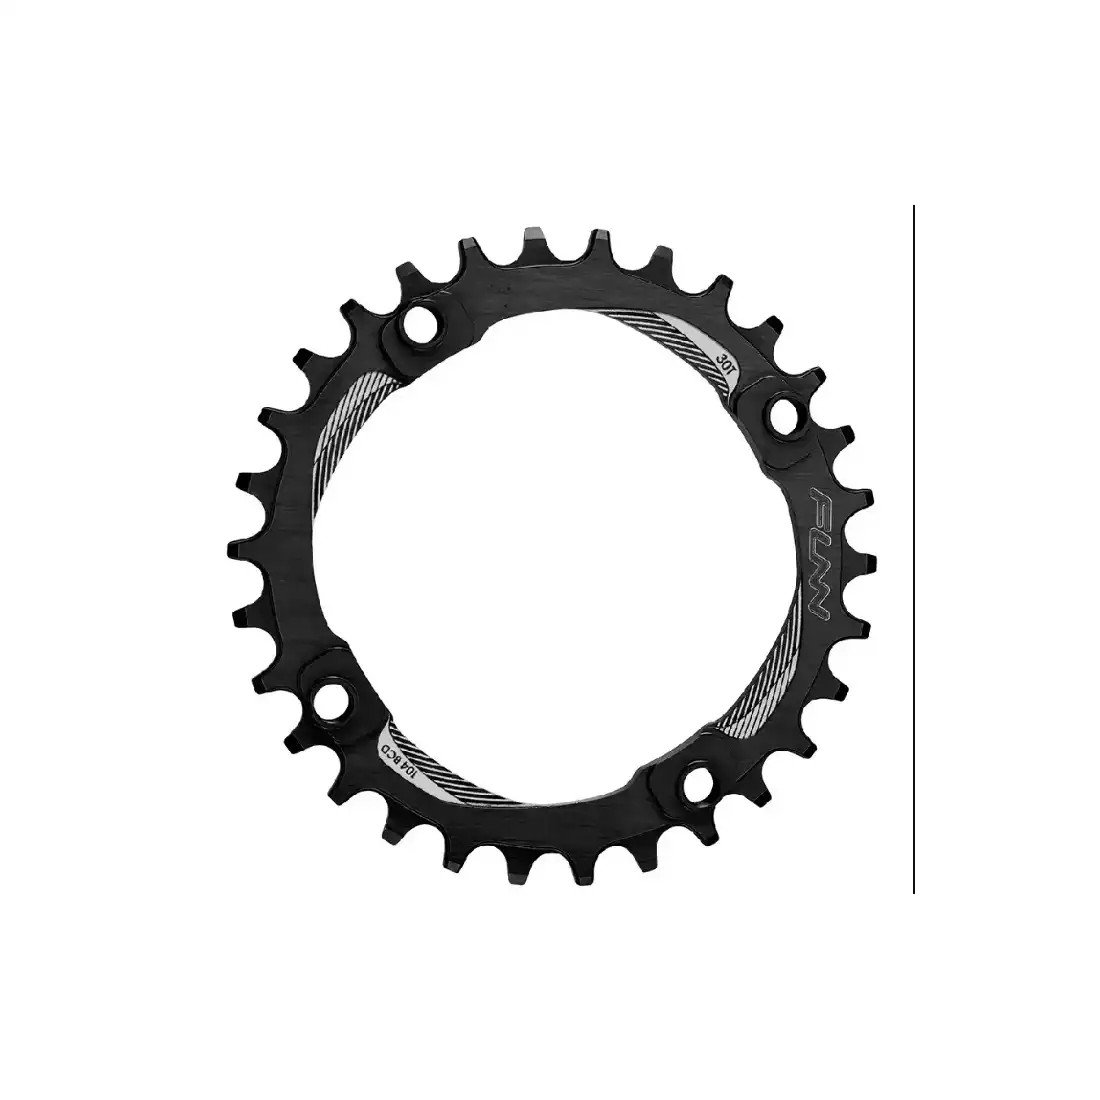 FUNN SOLO BCD bicycle sprocket for cranks 34T black